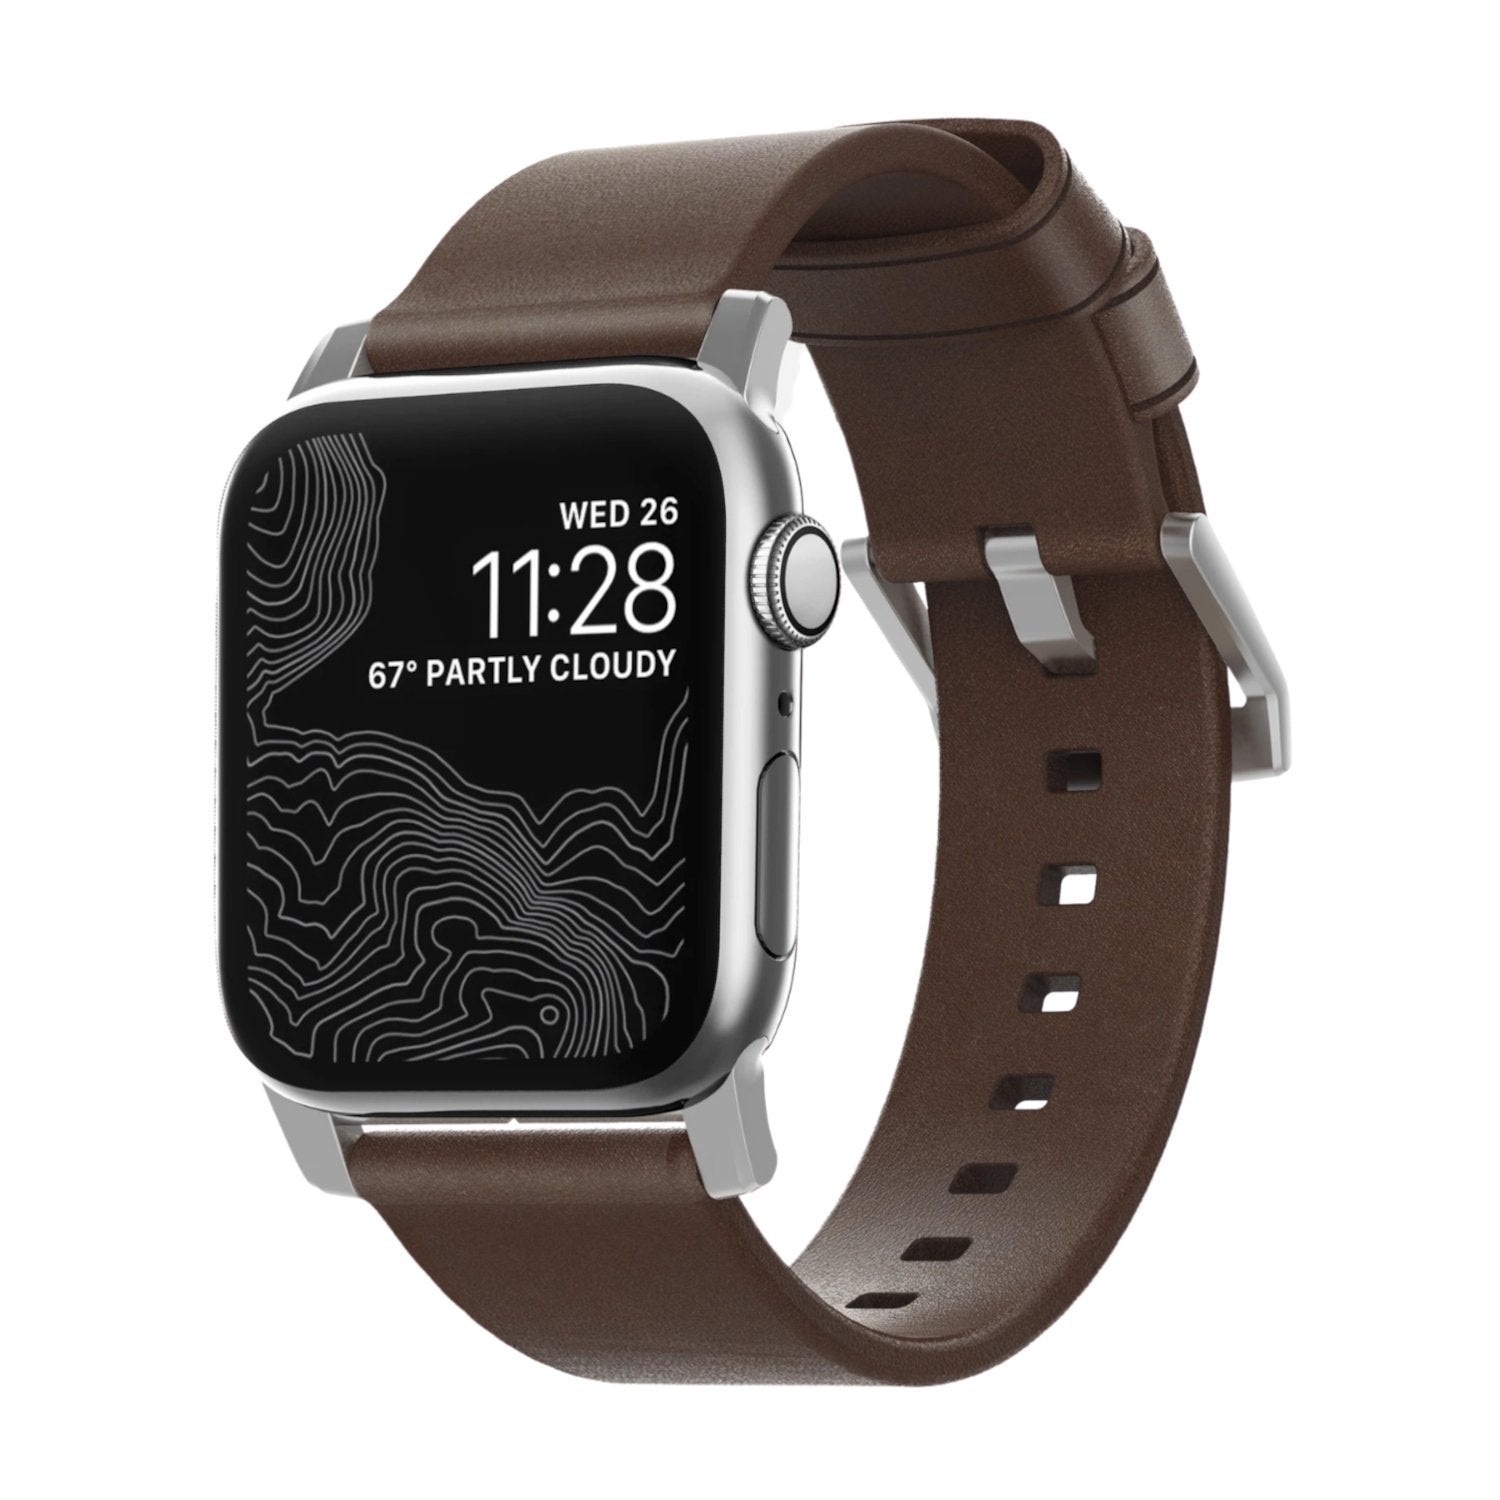 NOMAD Modern Strap Rustic Brown Horween Leather for Apple Watch 44mm/42mm, Silver Hardware Apple Watch Strap NOMAD 